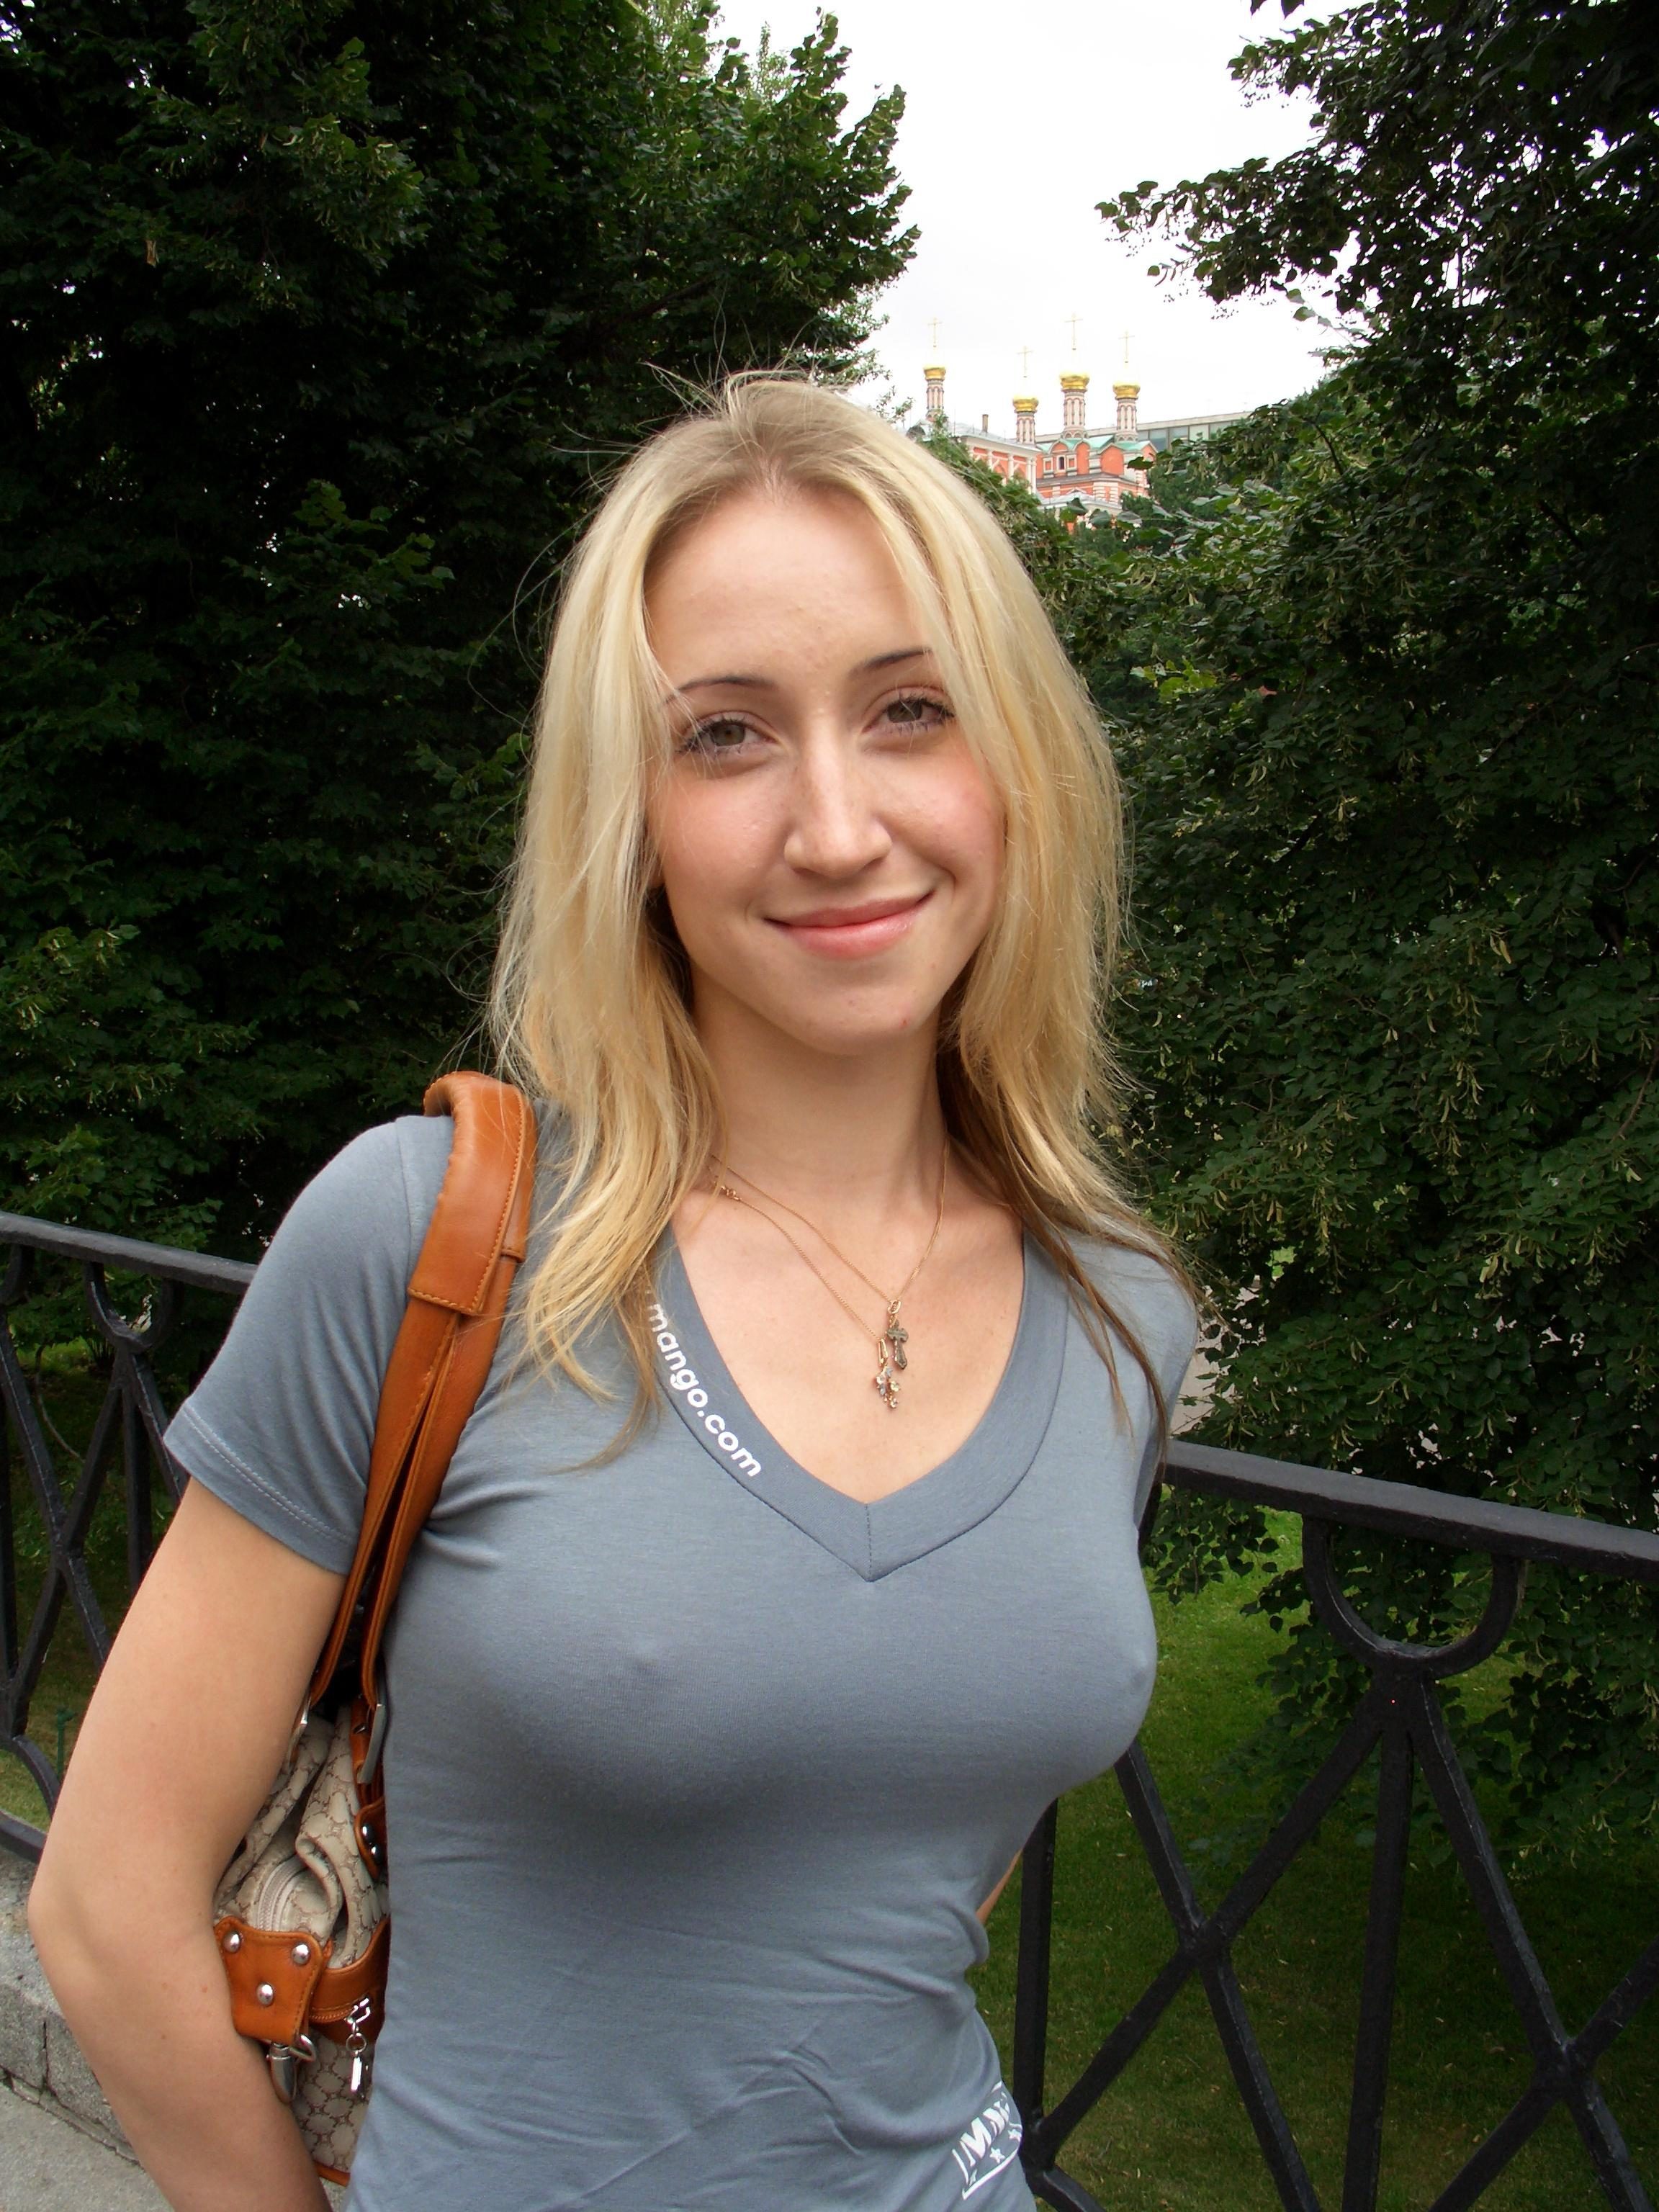 blonde-amateur-russian-outdoor-boobs-naked-jeans-public-03